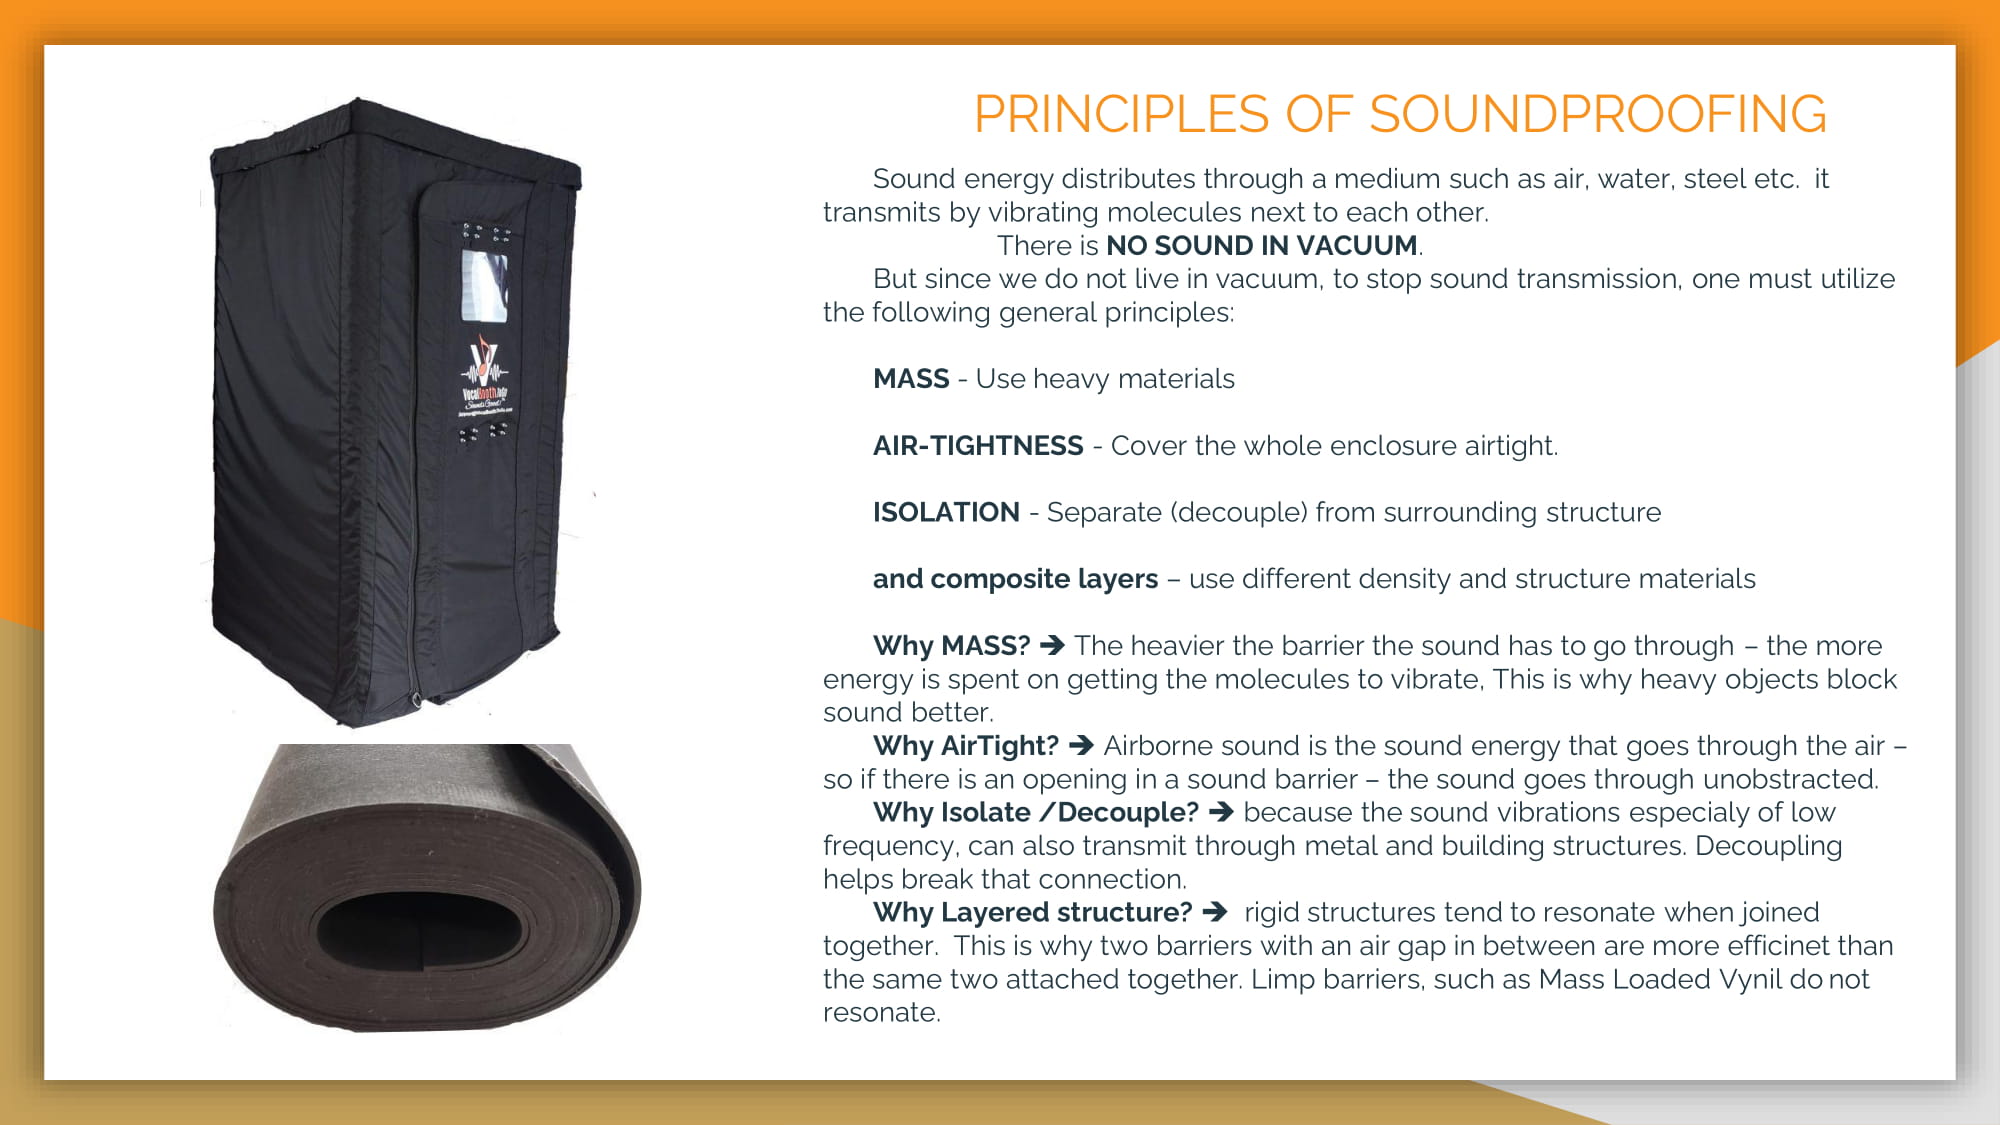 PRINCIPLES OF SOUNDPROOFING